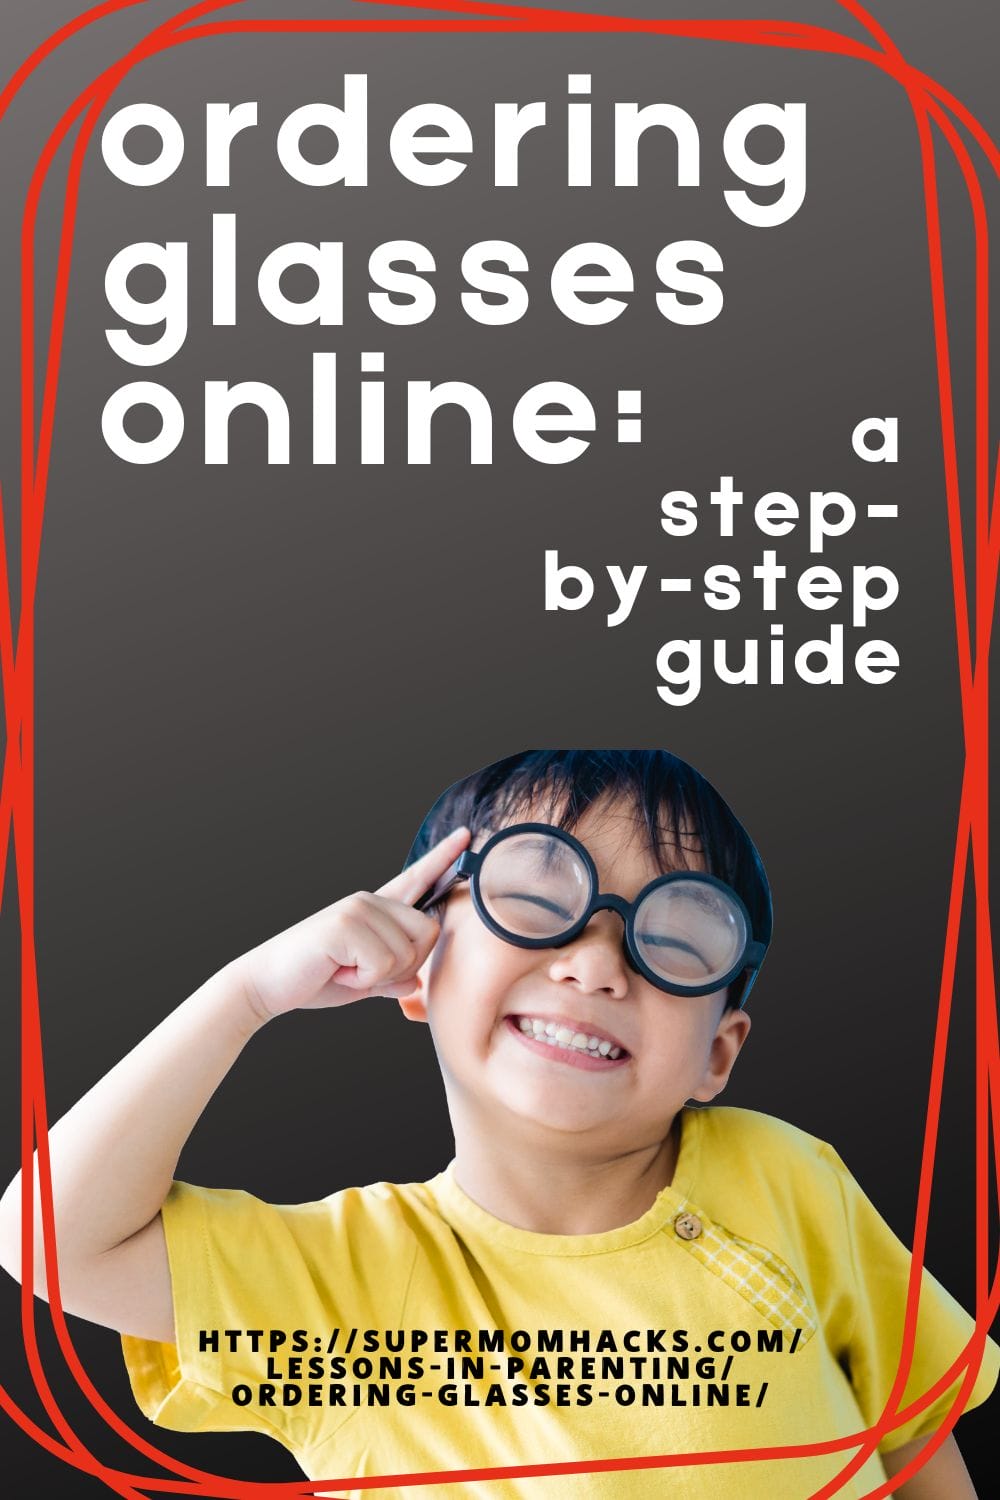 Every child deserves to have glasses they love, and ordering glasses online makes this easier than ever.